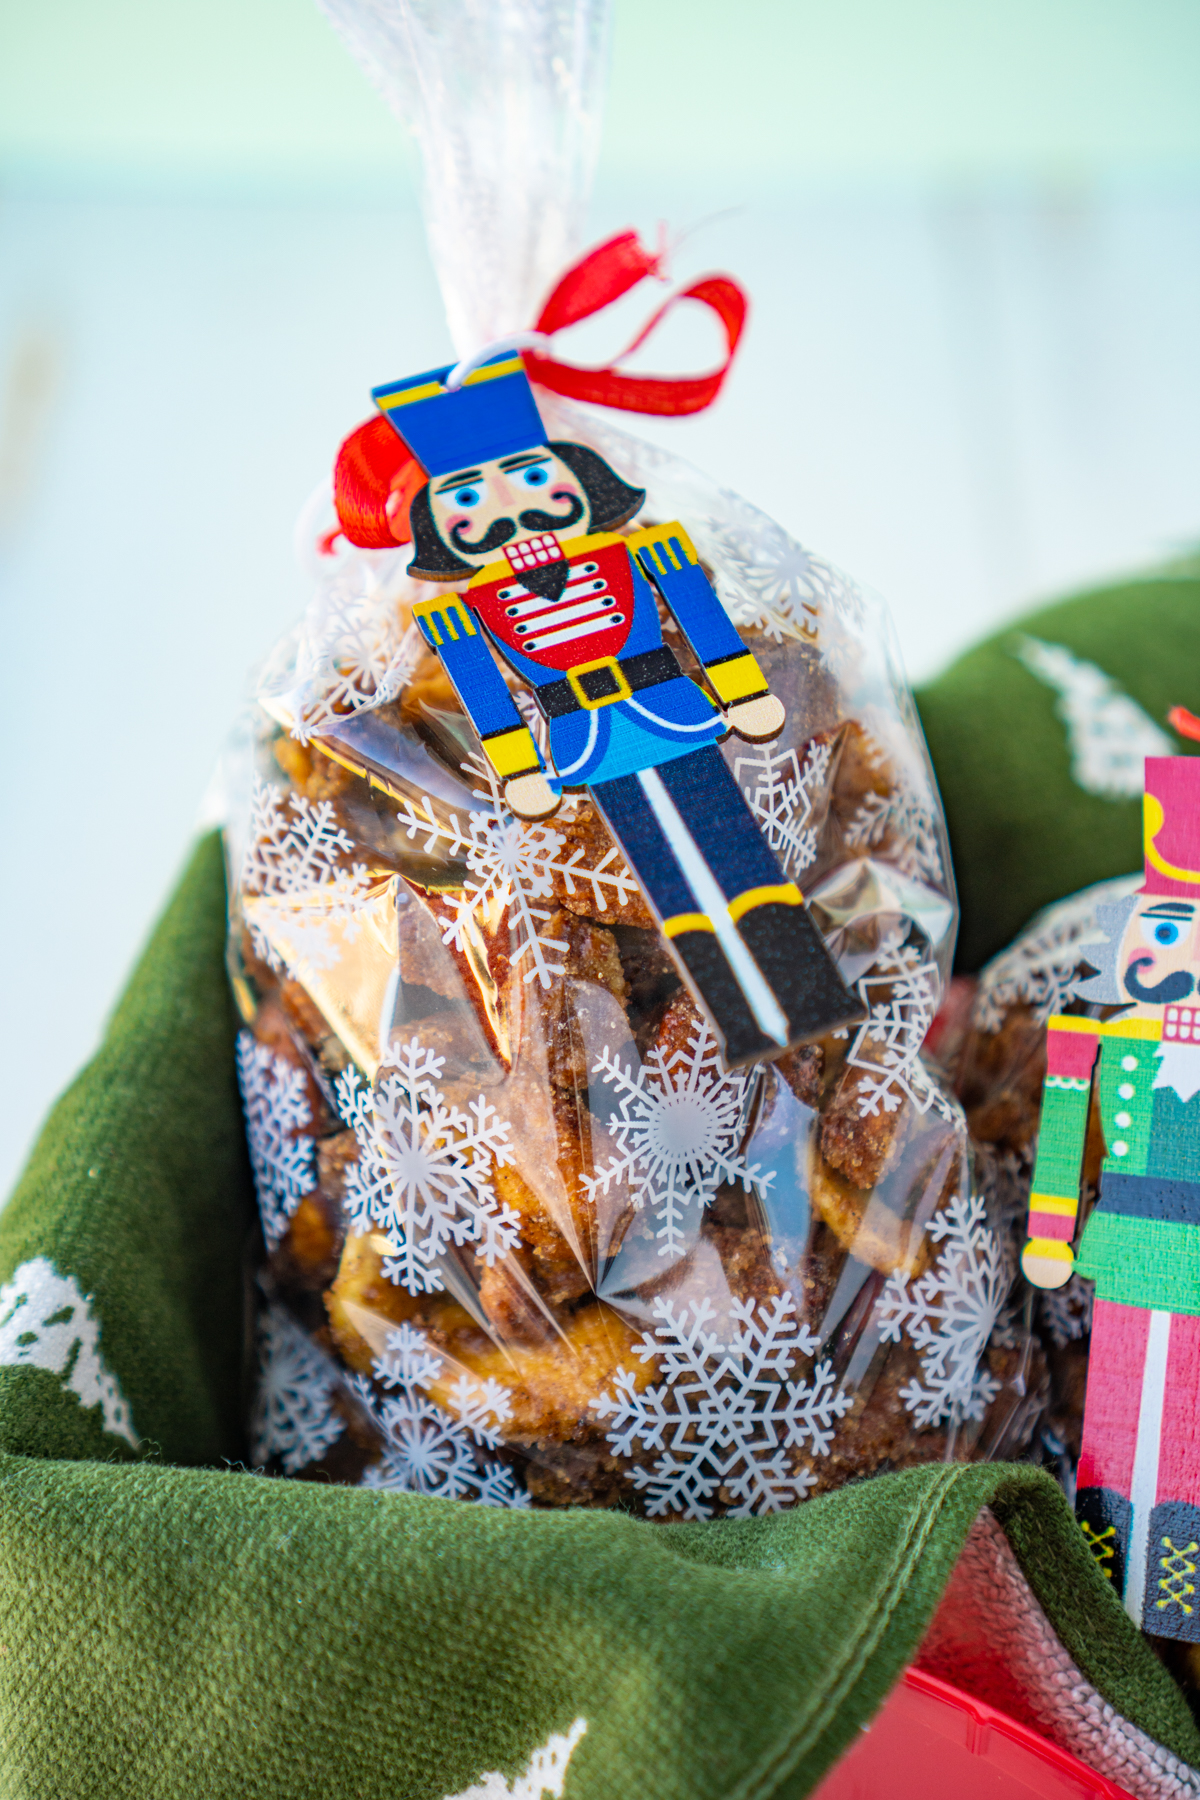 Bag of candied nuts with a nutcracker ornament on it